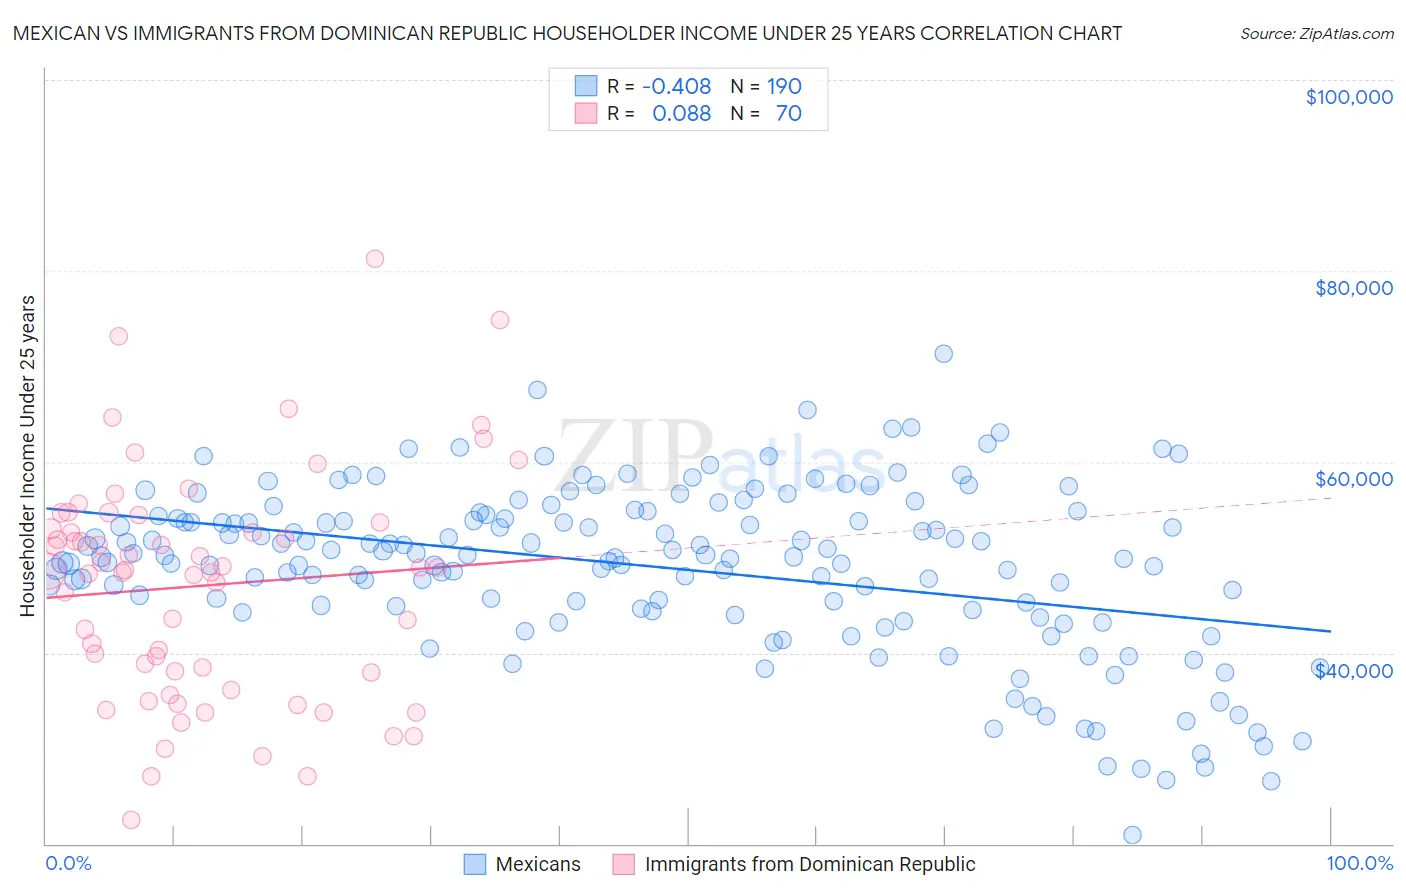 Mexican vs Immigrants from Dominican Republic Householder Income Under 25 years